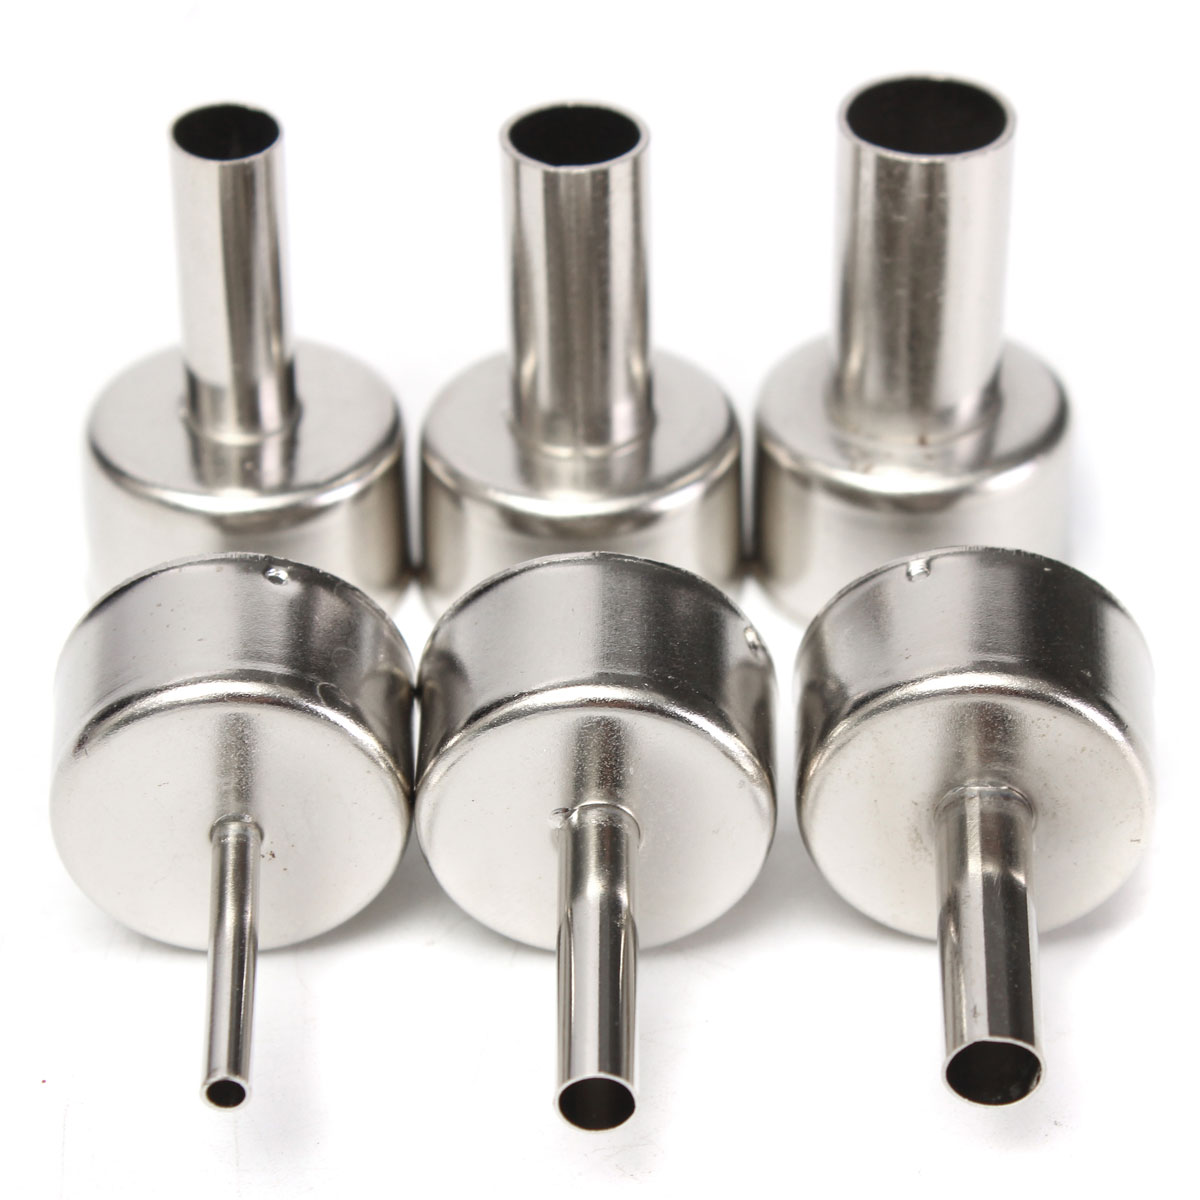 6Pcs 3-12Mm Round Nozzle for Hot Air Soldering Station Universal Heat Resistant me G6U8 